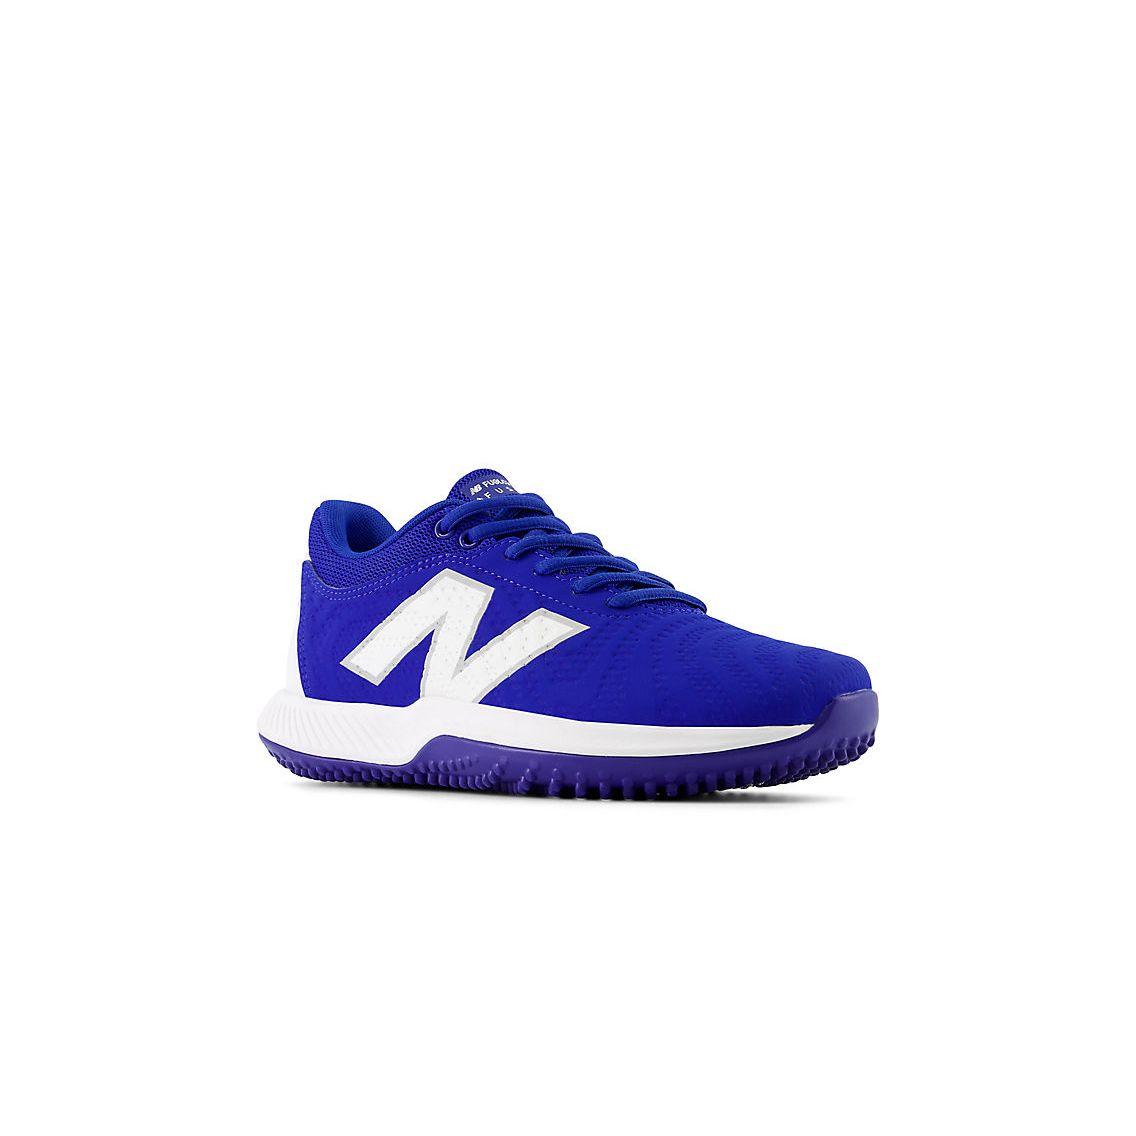 New Balance Women's FuelCell FUSE v4 Turf Trainer Softball Shoes - Team Royal/Optic White - STFUSEB4